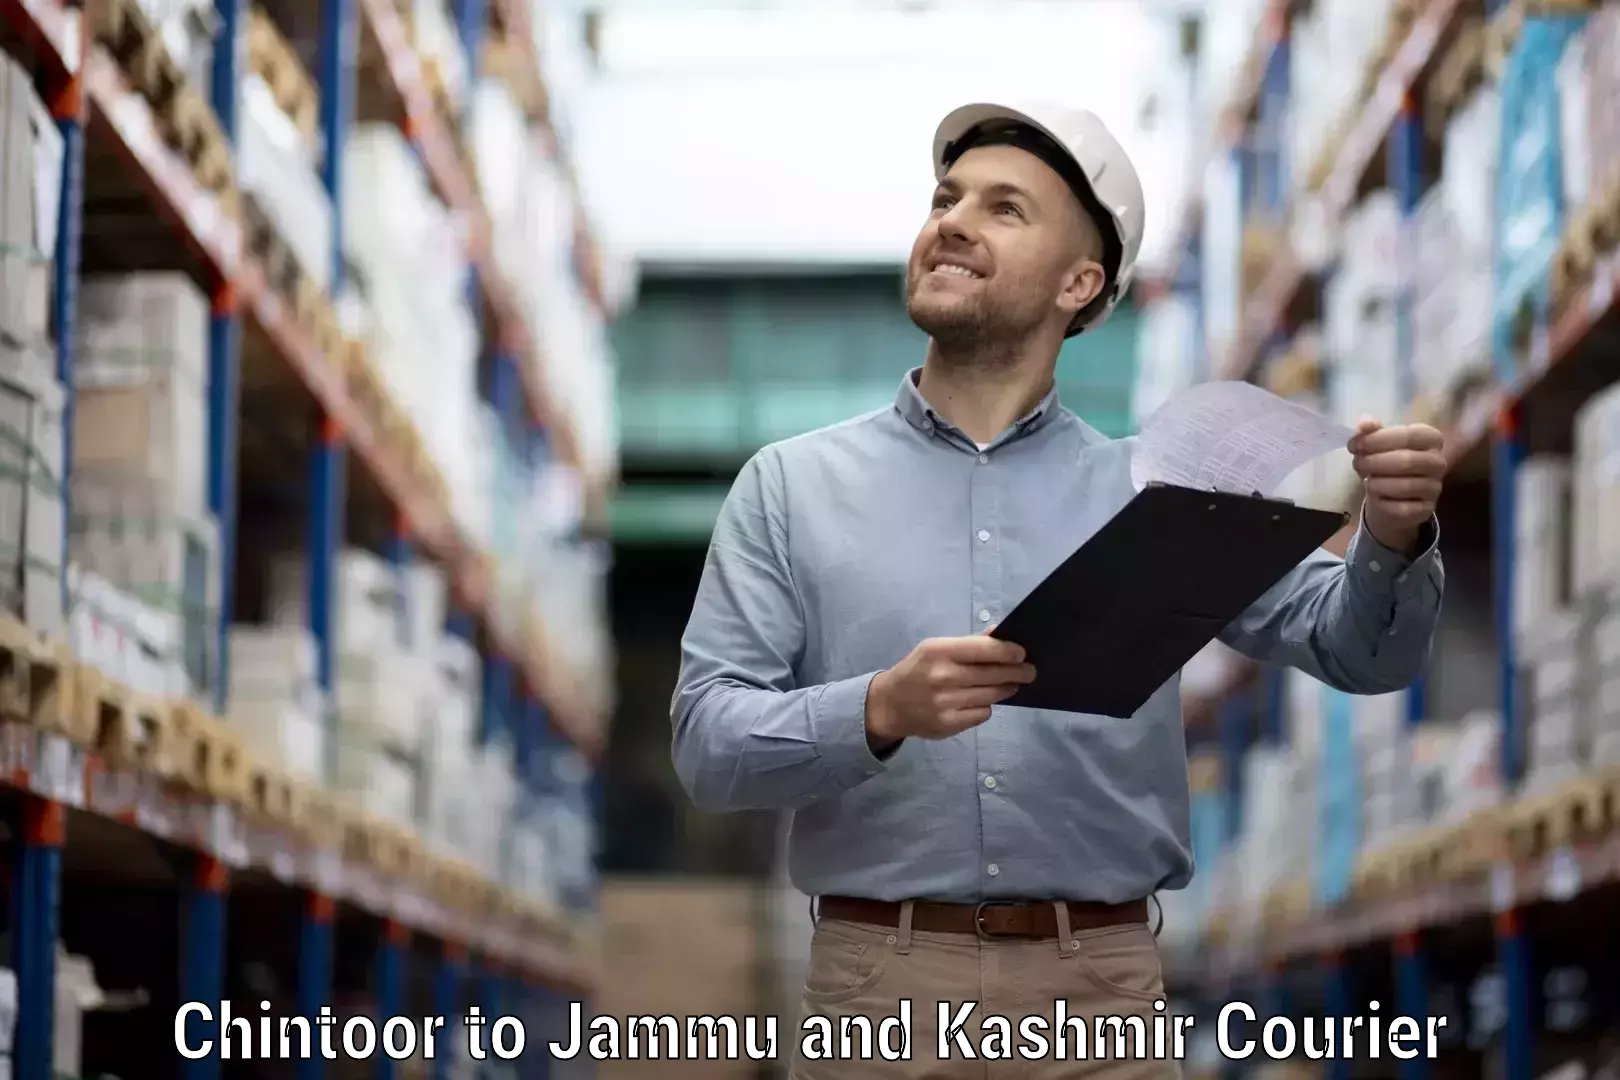 Efficient order fulfillment Chintoor to Ramban